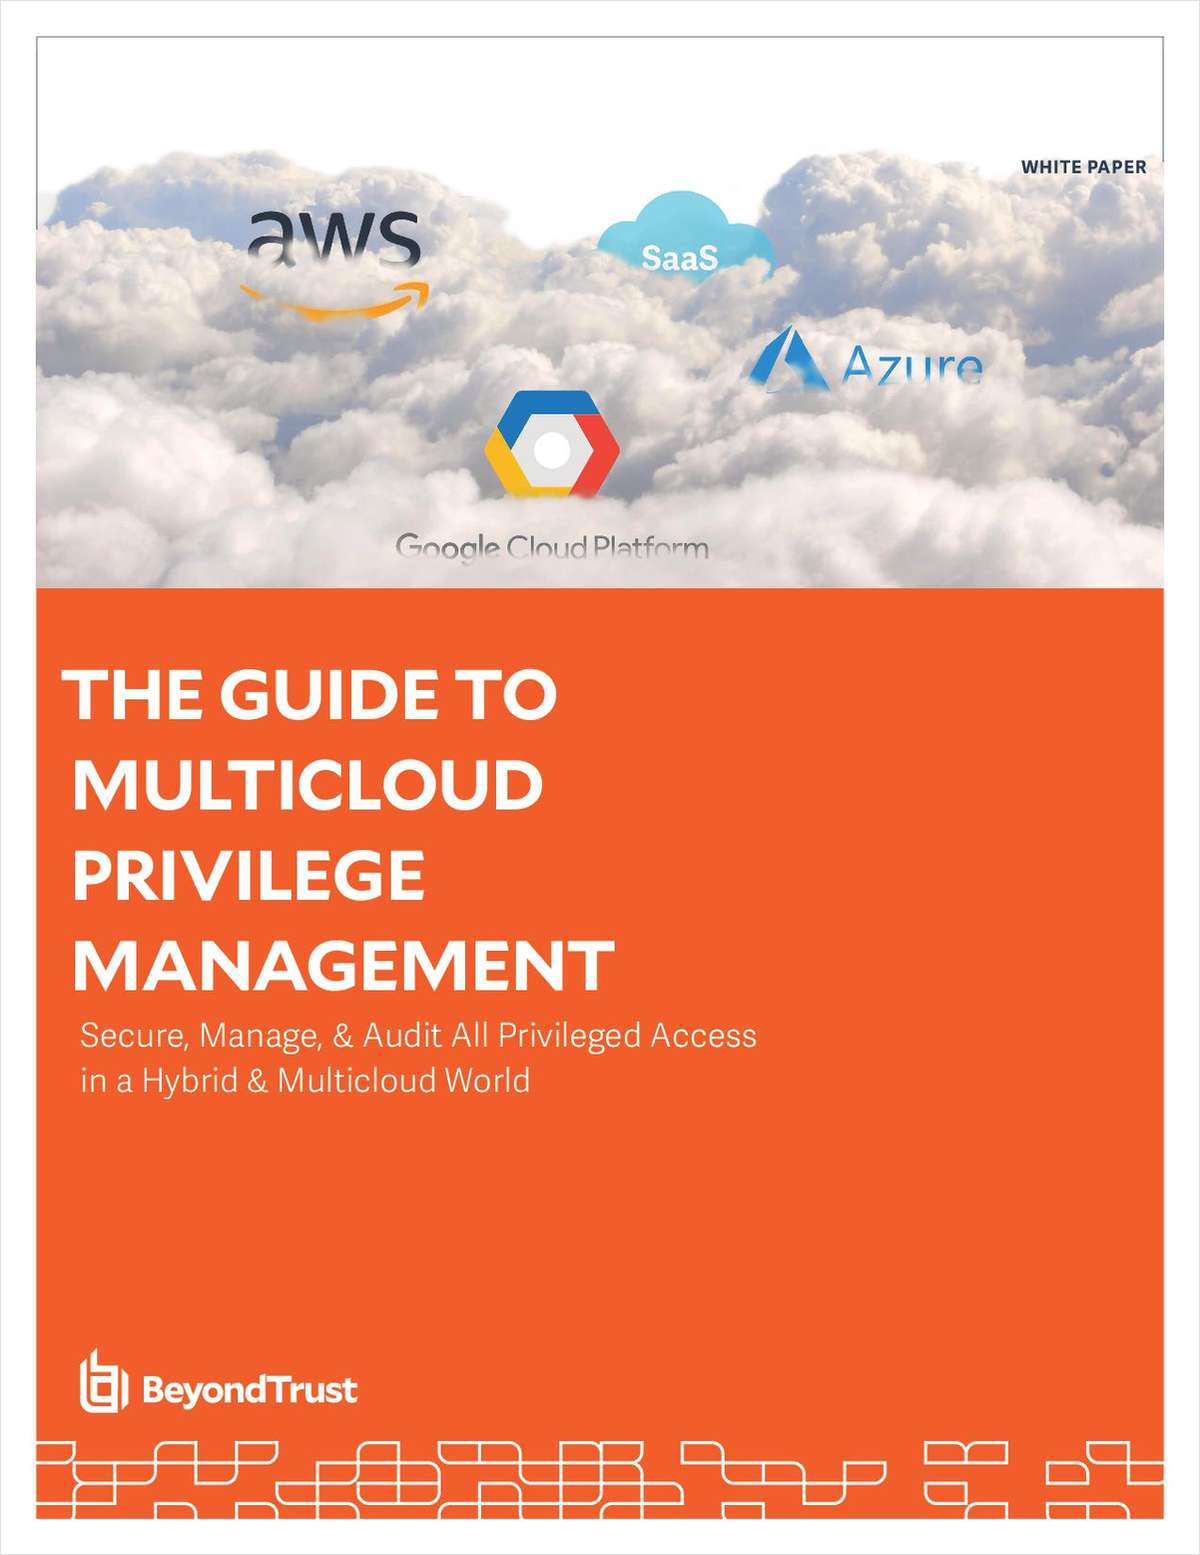 The Guide to Multicloud Privilege Management